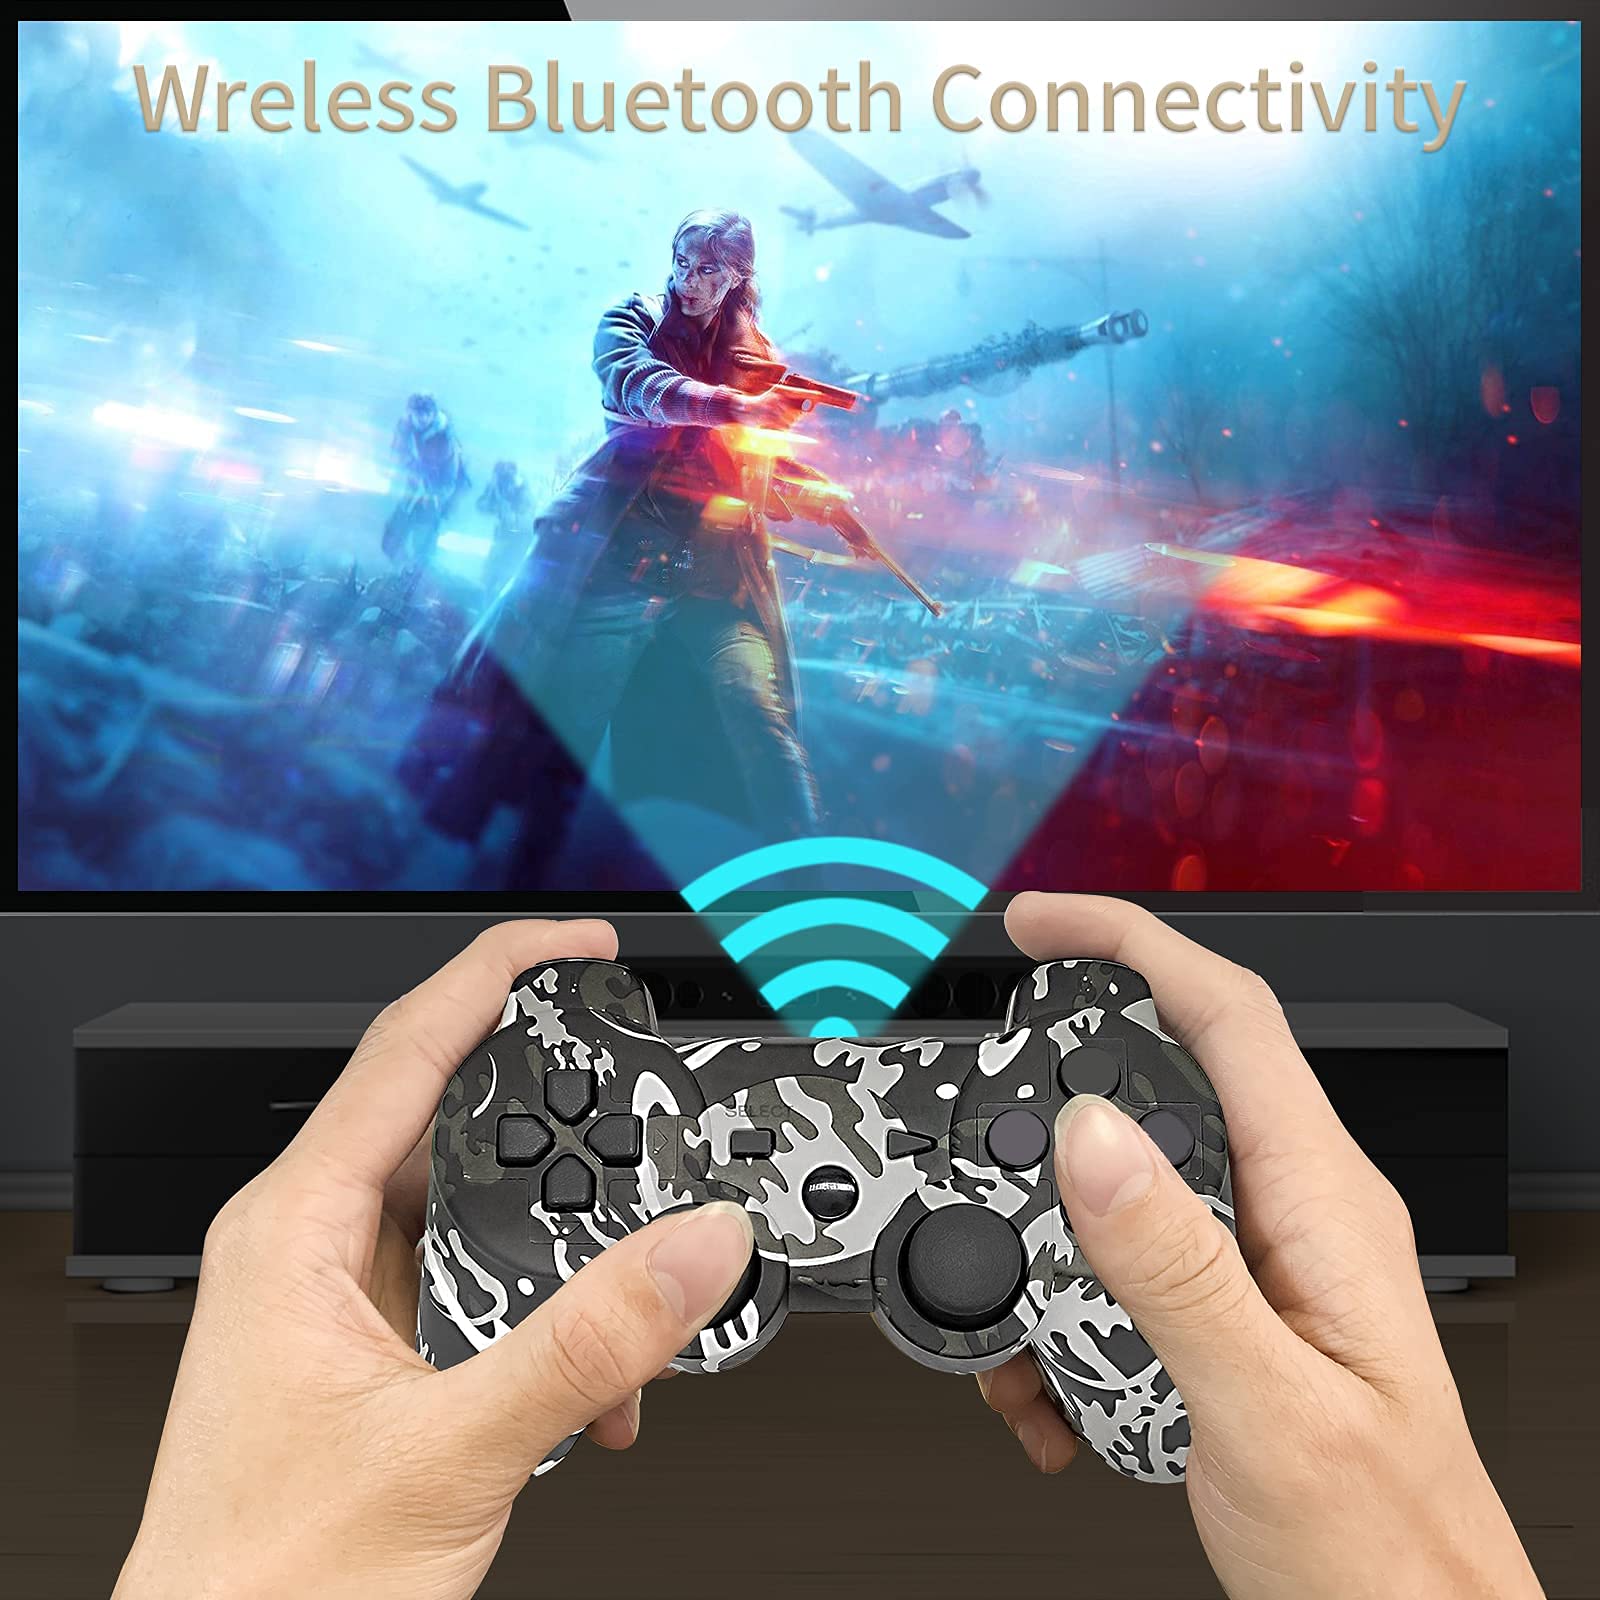 Controller Wireless, CFORWARD Game Controller Compatible for play3 Remote Joy sticks with Dual Vibration and 6Axis, Wireless Controller with Charger and Thumb Gripss